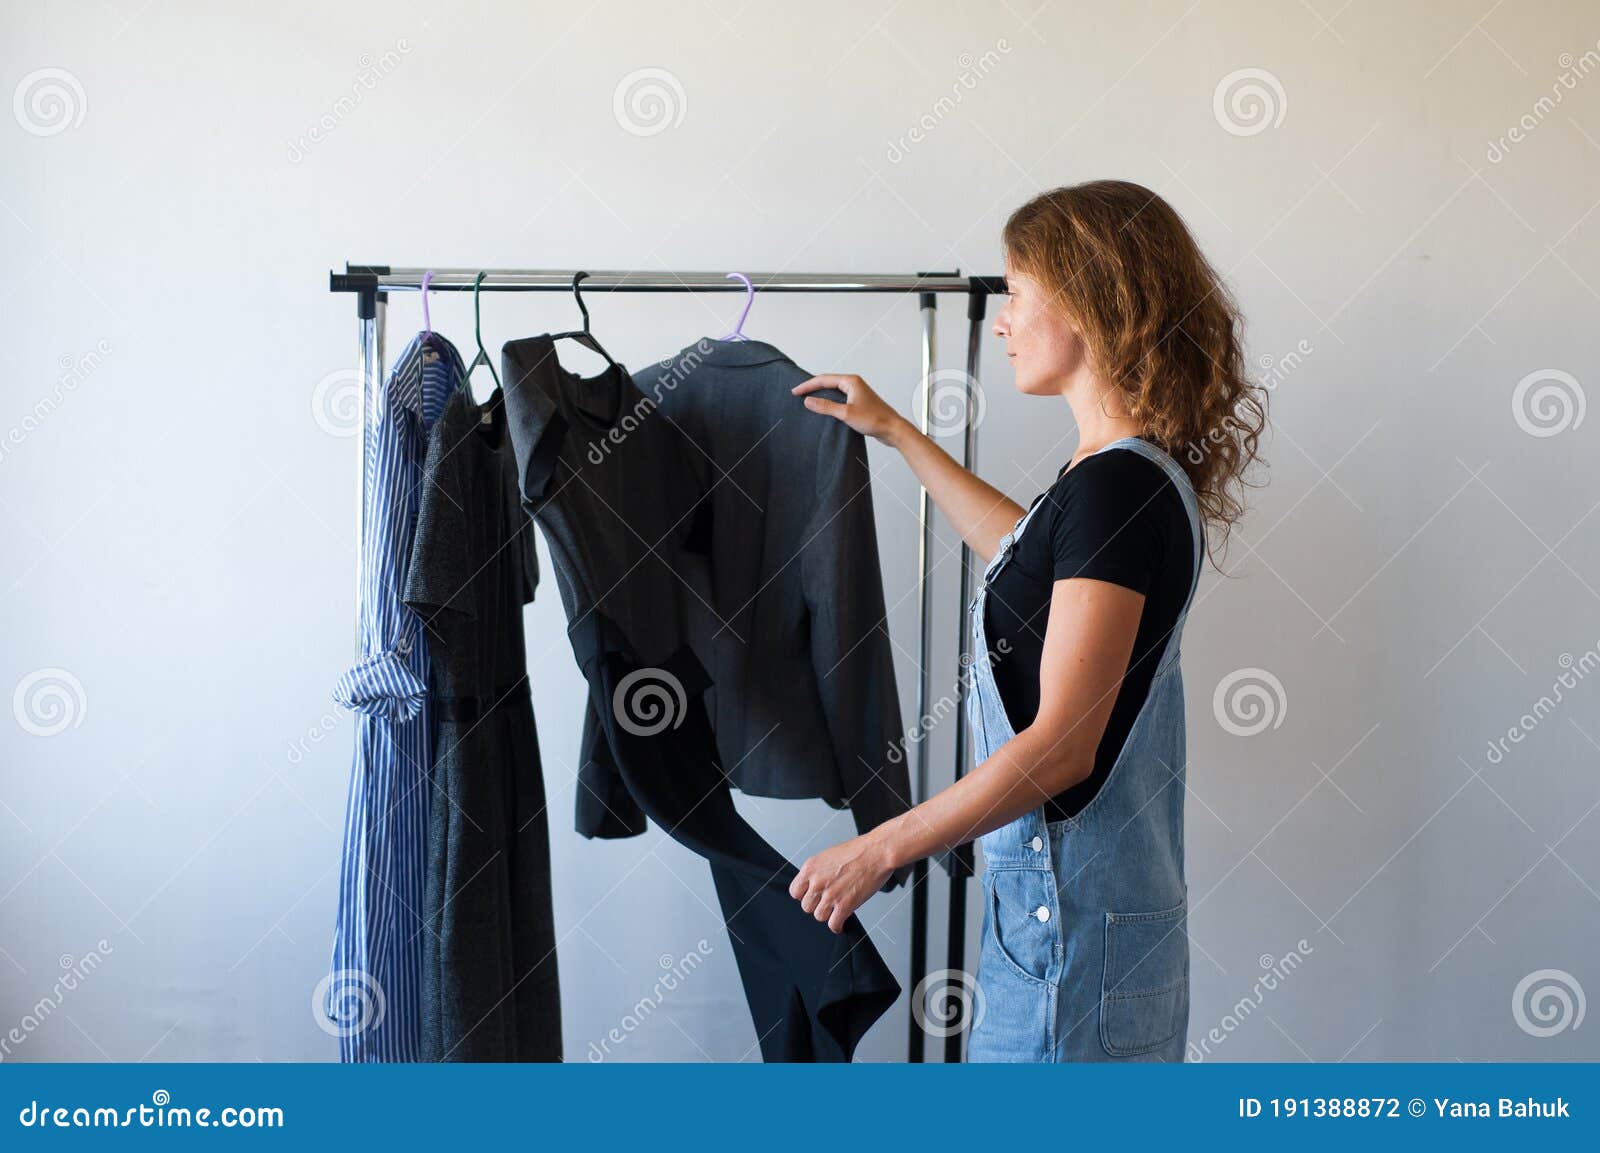 woman looking at clothes. young shopping fun. clothes on a rack